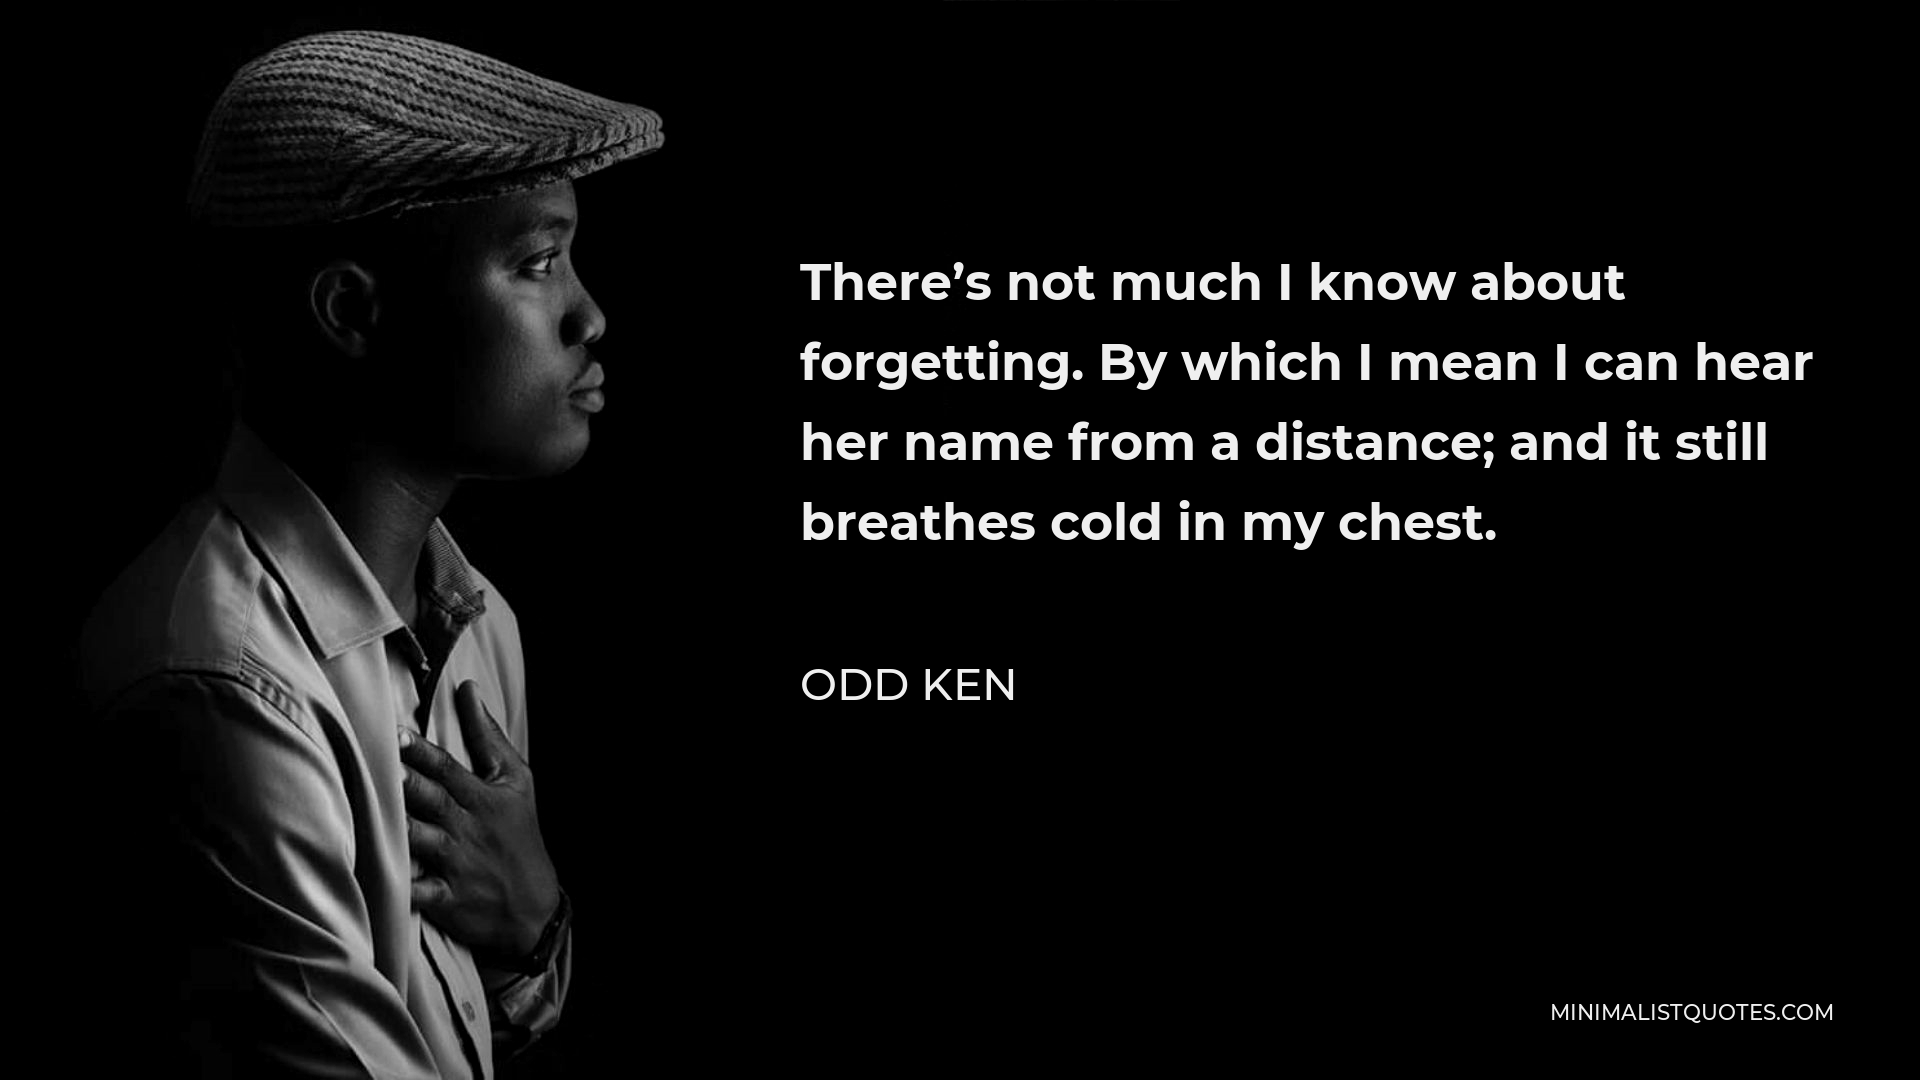 Odd Ken Quote - There’s not much I know about forgetting. By which I mean I can hear her name from a distance; and it still breathes cold in my chest.